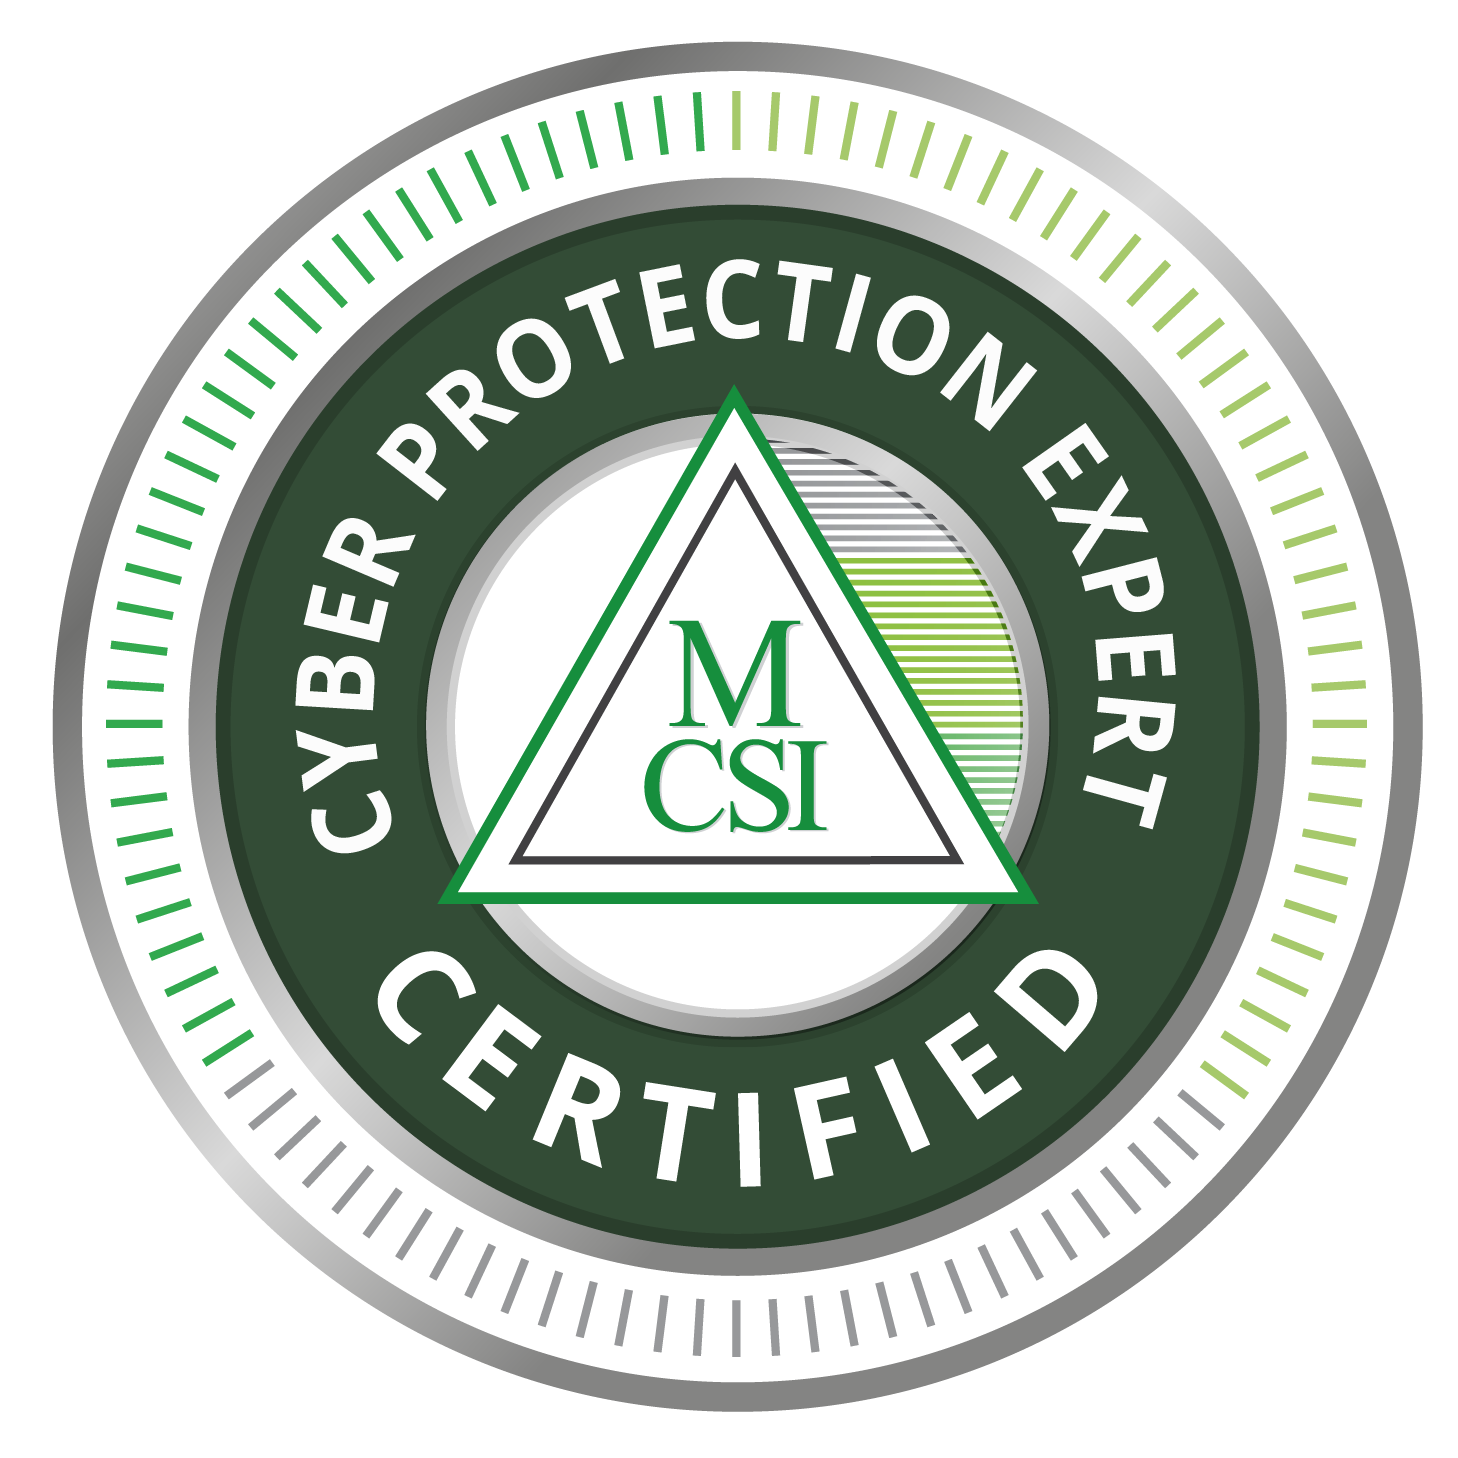 Cybersecurity Certification - Mossé Cyber Security Institute MCPE Certified Cyber Protection Expert Certification